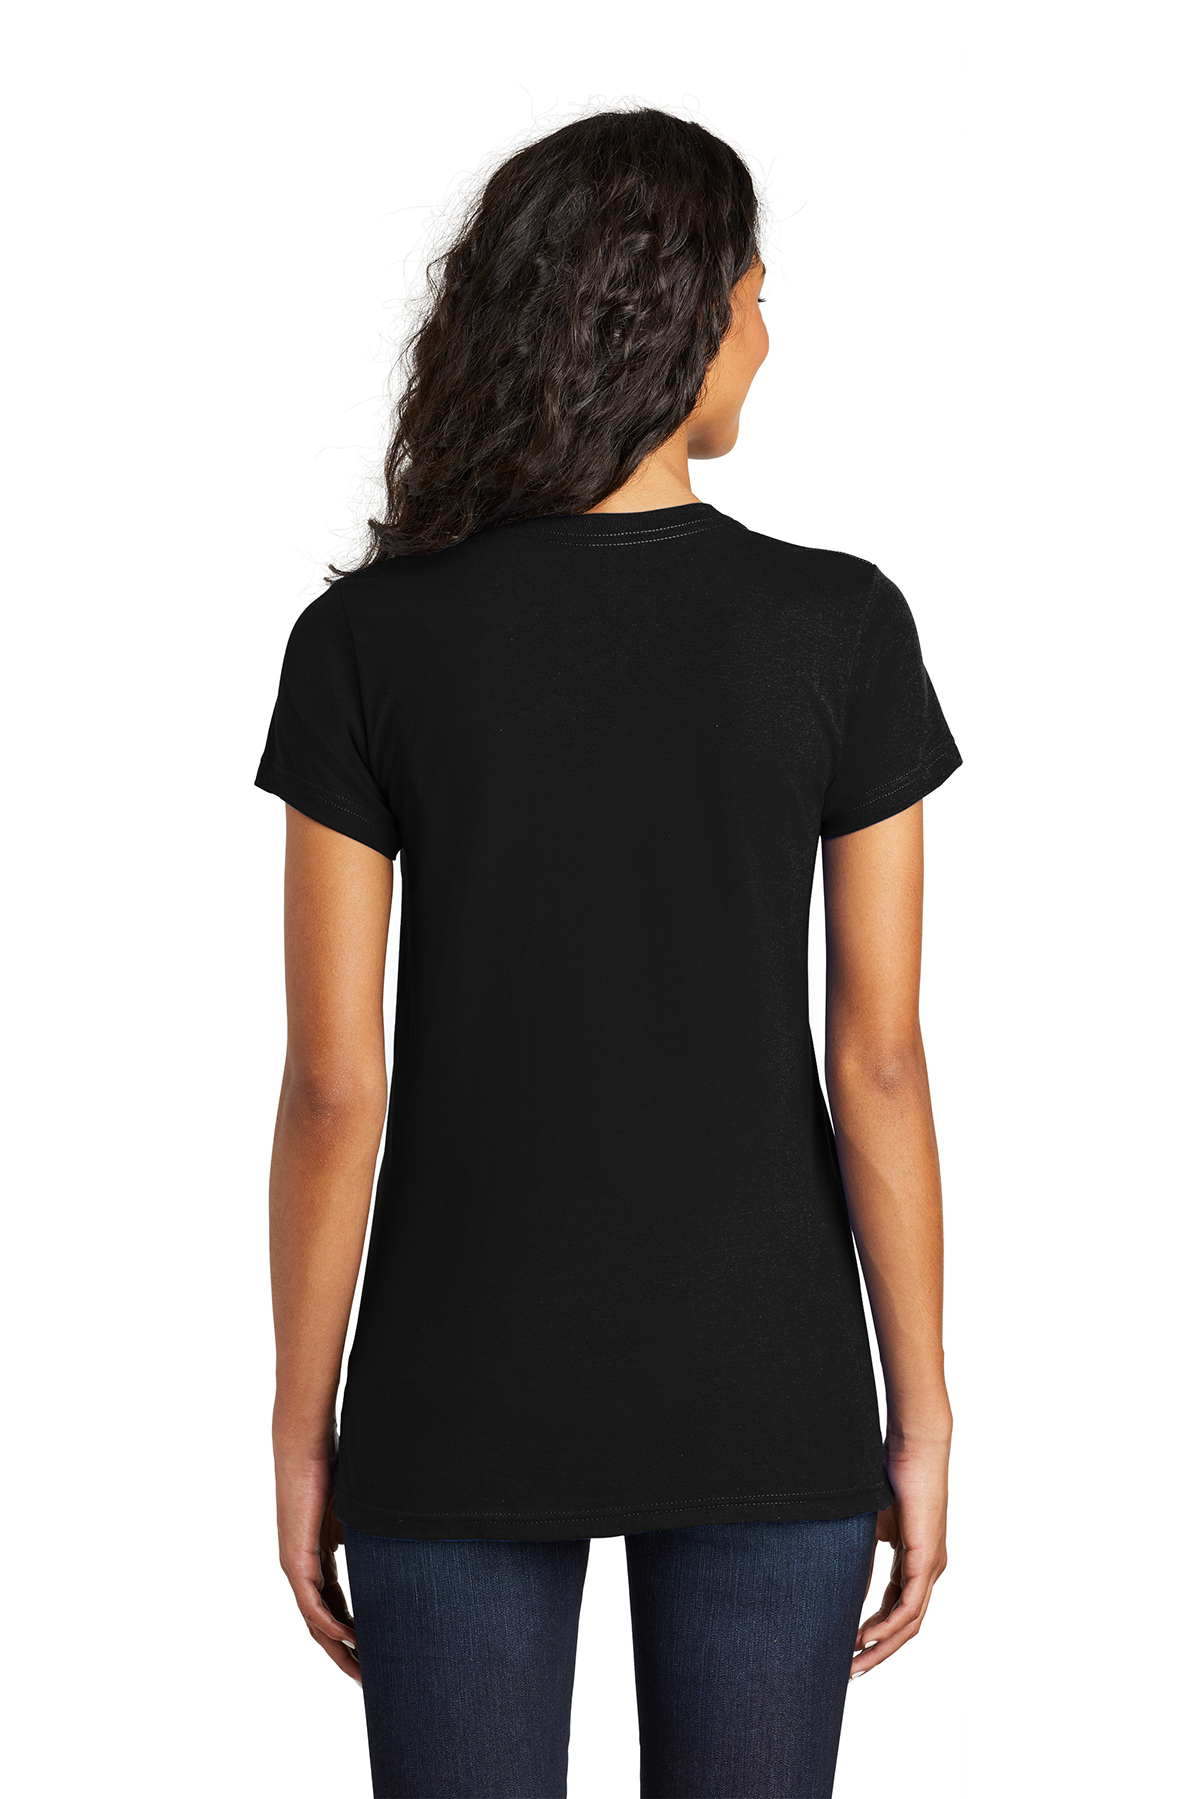 District Women’s Fitted The Concert Tee | Product | SanMar